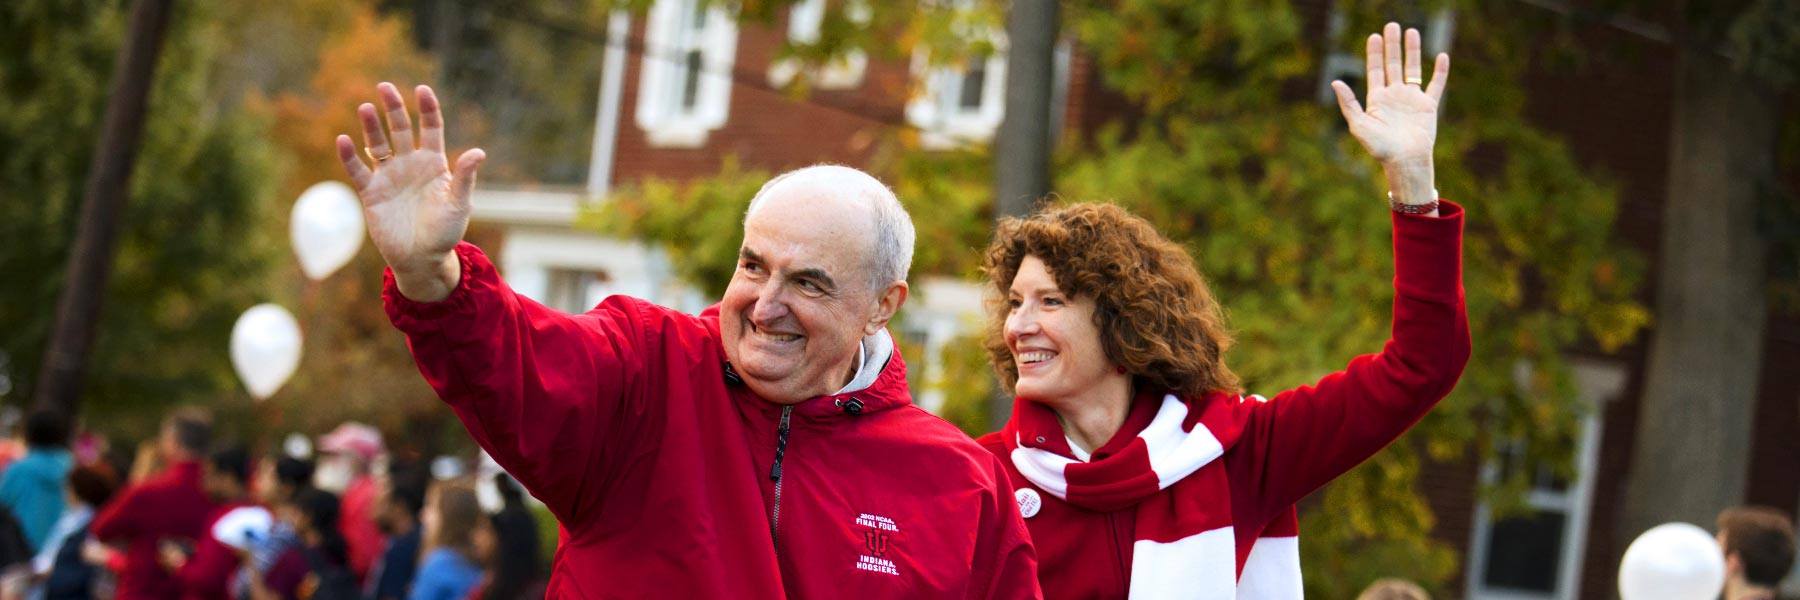 Michael McRobbie and Laurie Burns McRobbie in the homecoming parade